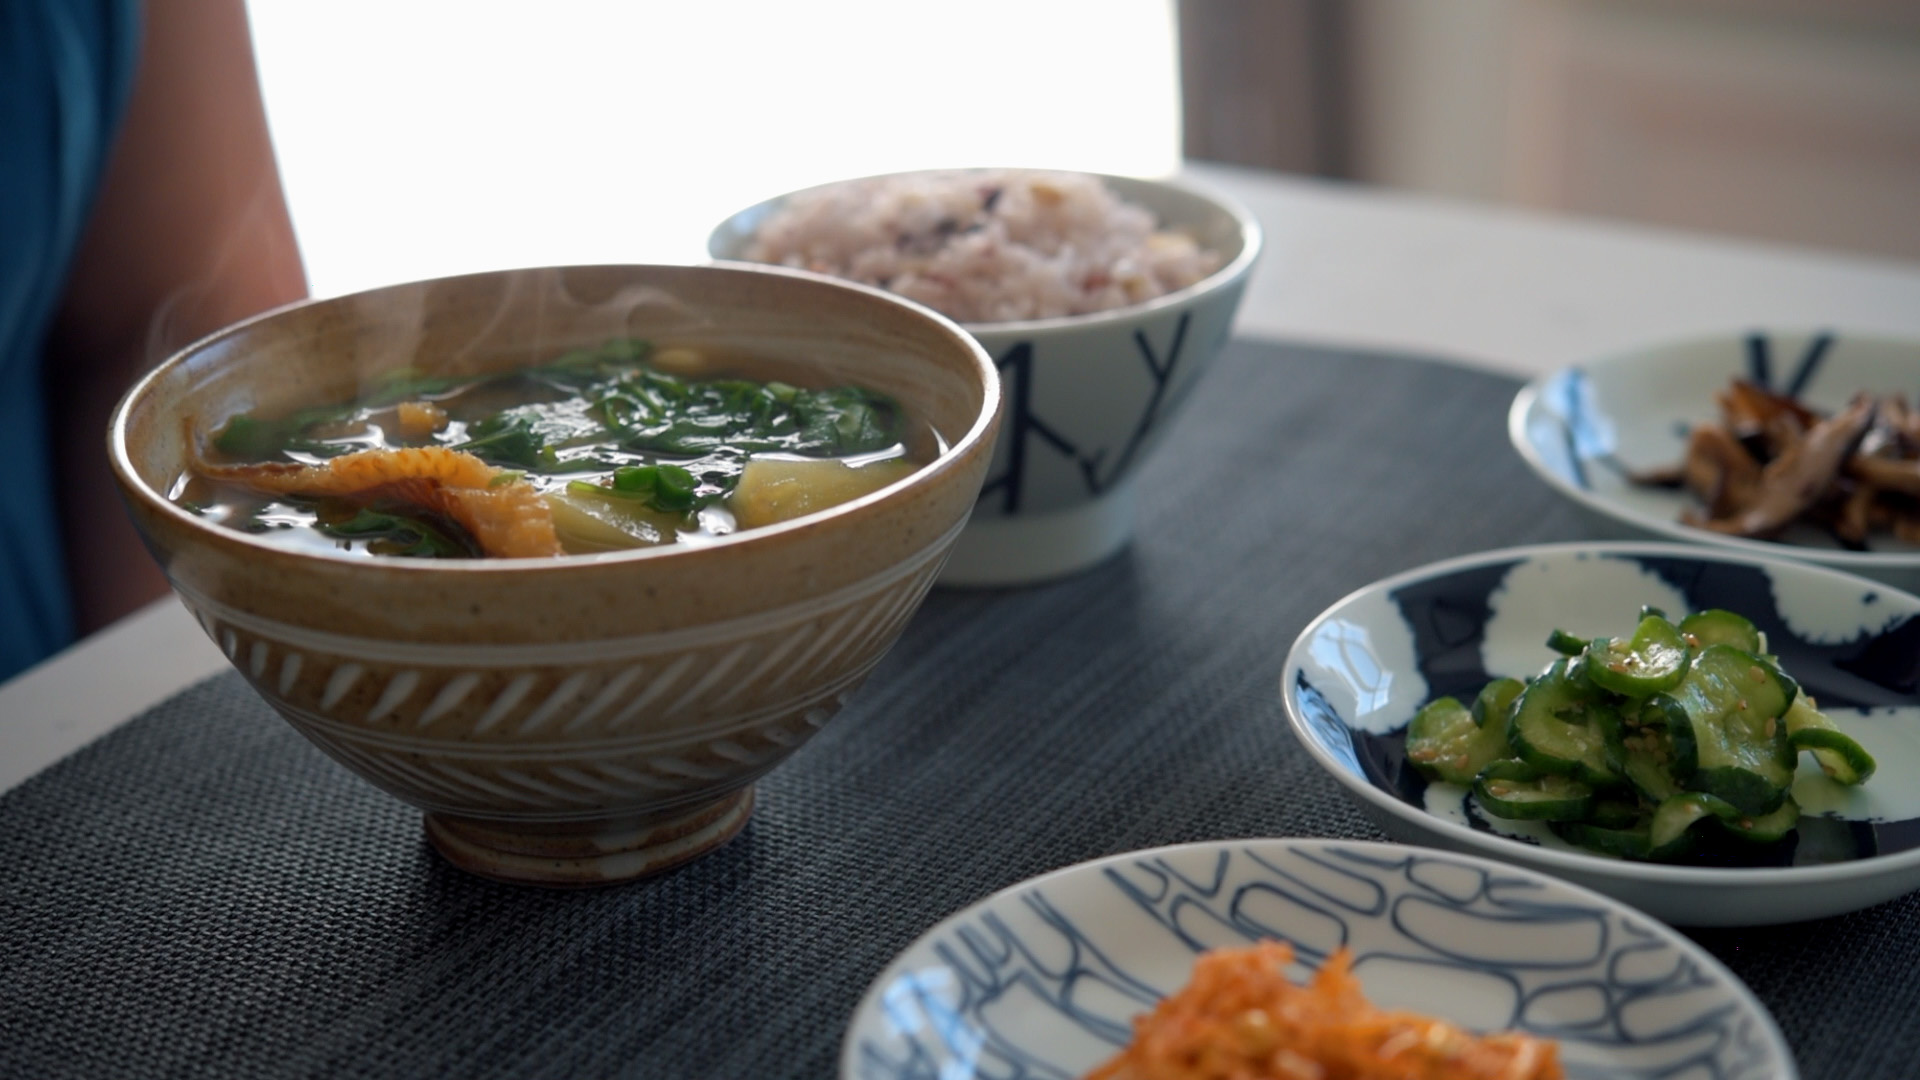 This quick Korean soup with arugula and potato is flavored with dried pollock fish and Korean soybean paste.